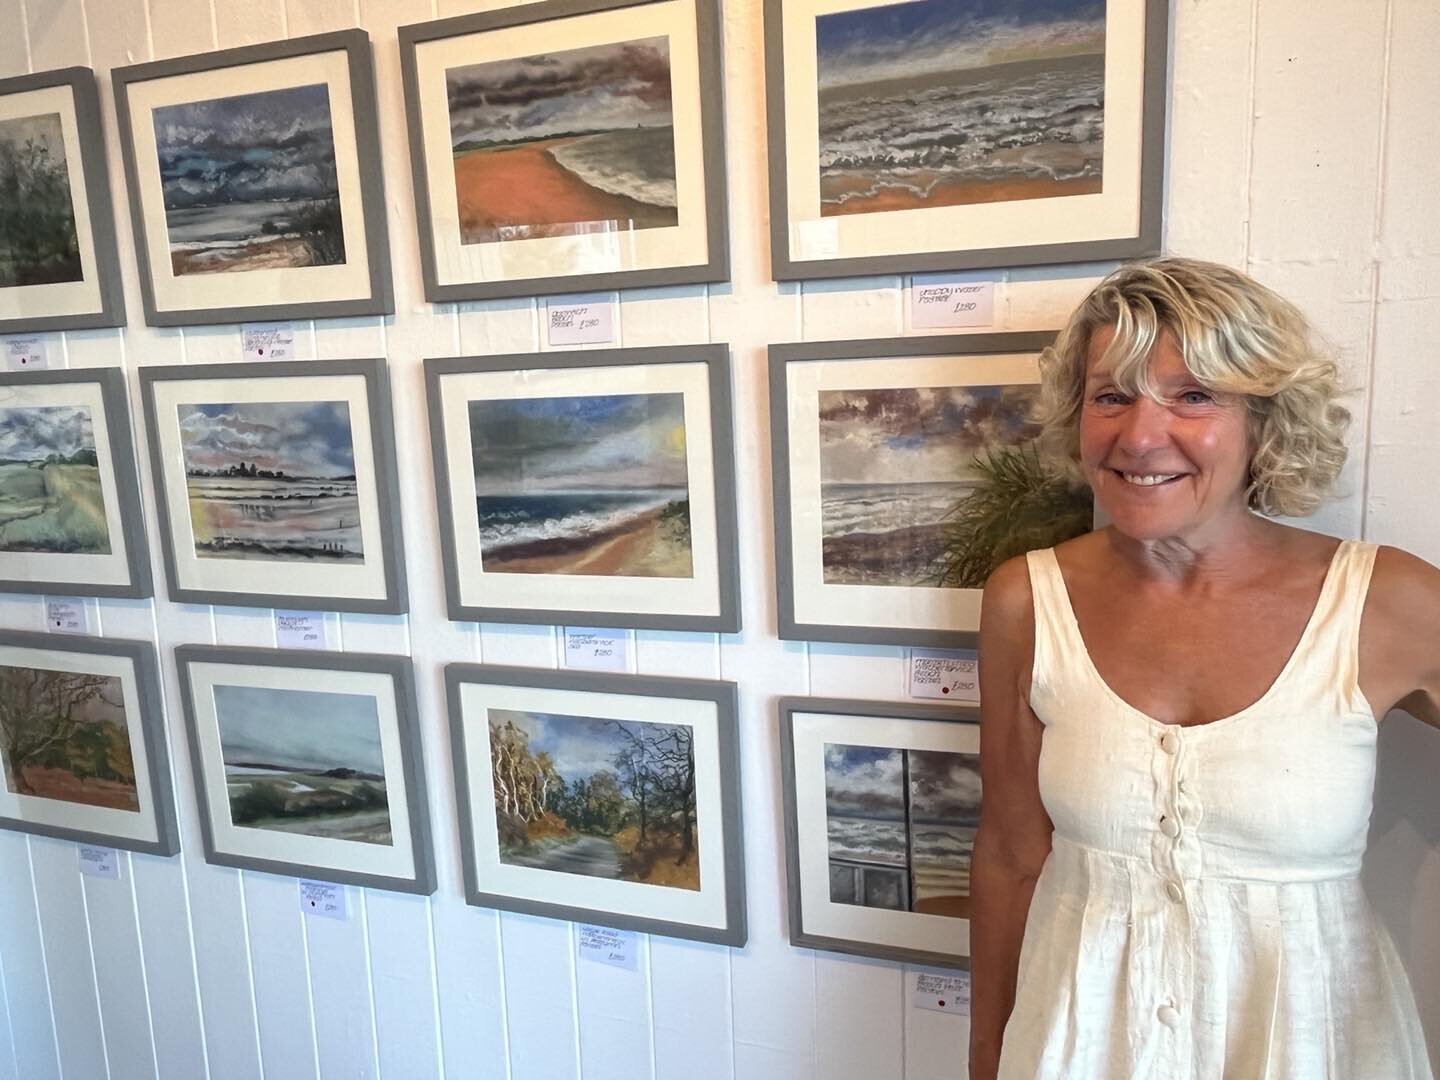 Meet Helen Atkinson Wood at 1 o&rsquo;clock today for cool cocktails on the beach and to see her exhibition at the Aldeburgh Beach Lookout